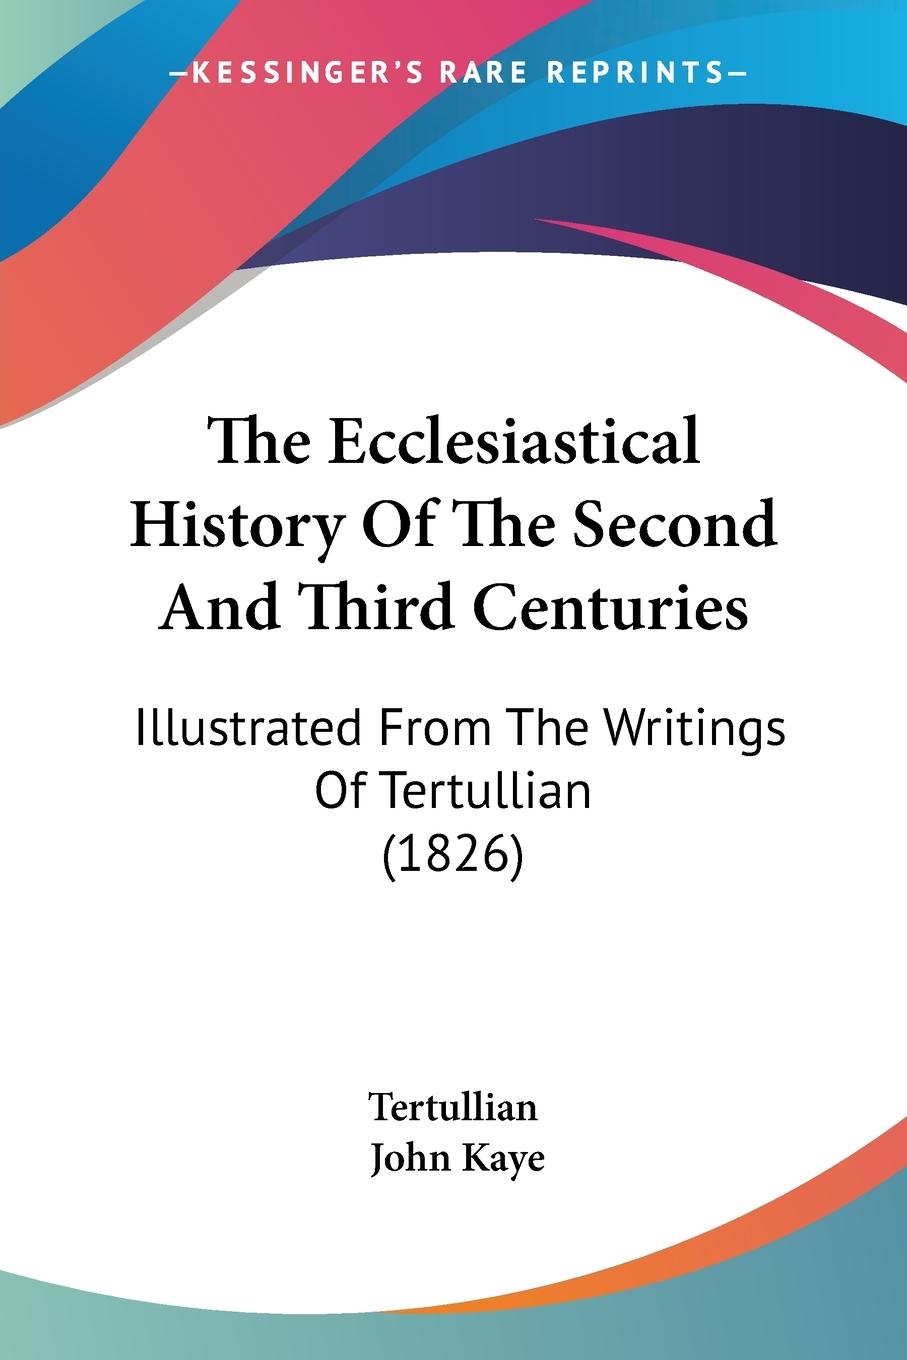 The Ecclesiastical History Of The Second And Third Centuries - Tertullian Kaye, John